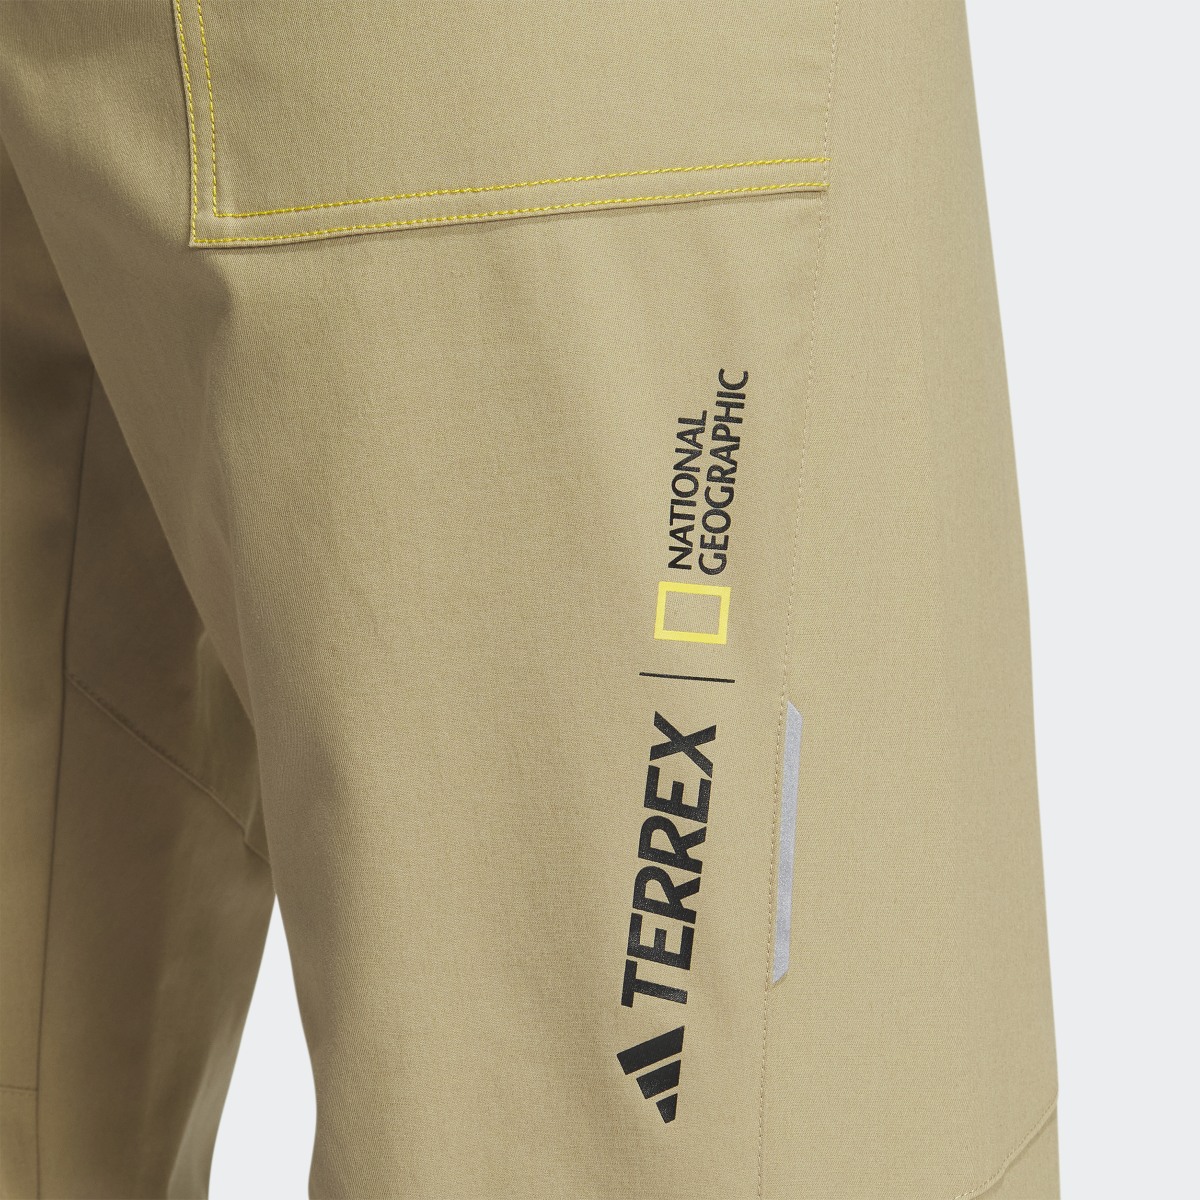 Adidas National Geographic Twill Pants. 6